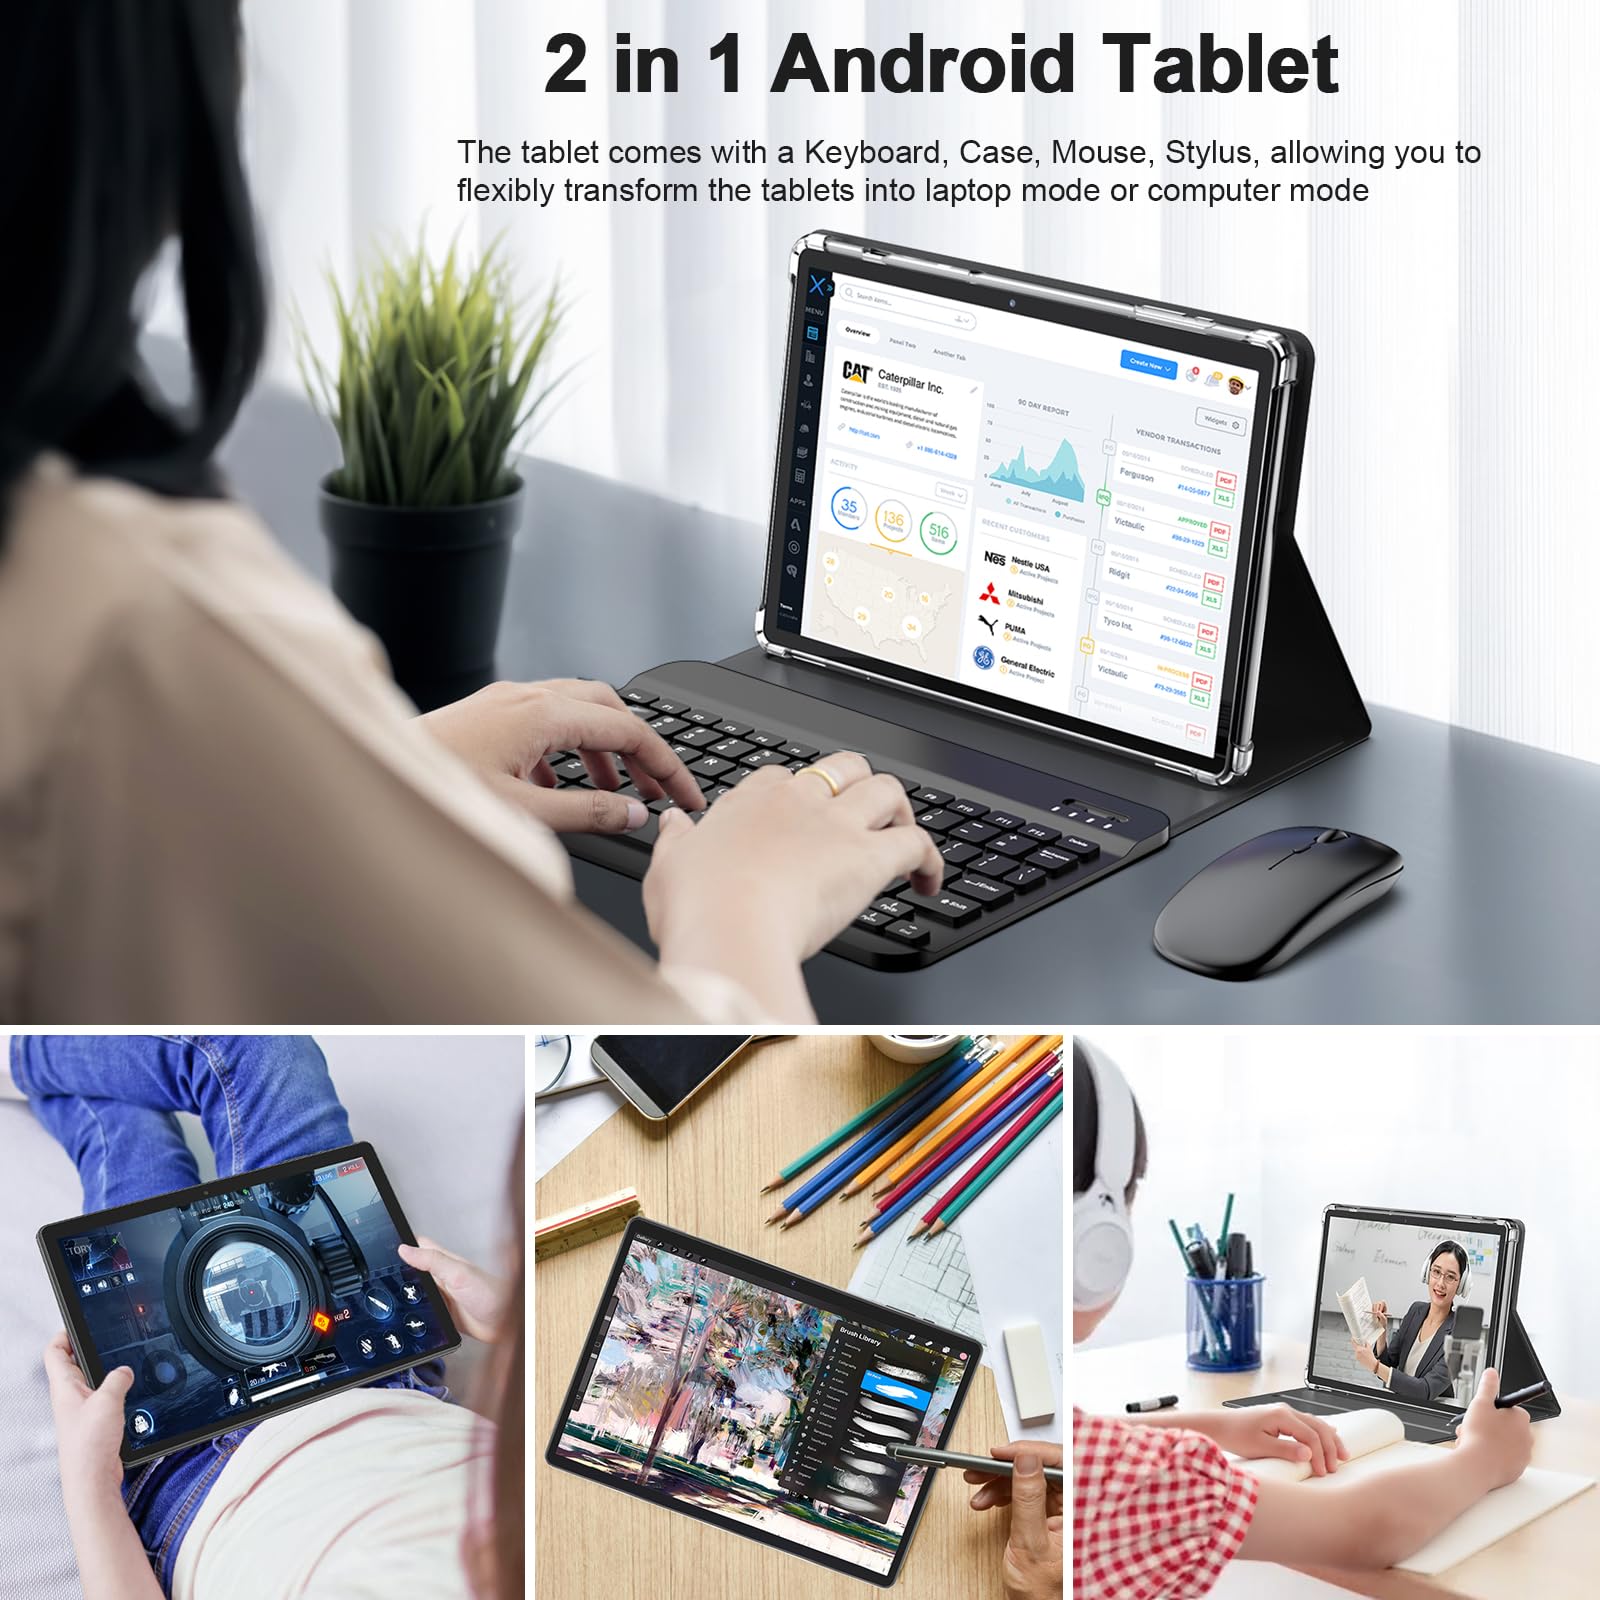 RliyOliy Android Tablet, 2 in 1 Tablet with Keyboard, 10 inch Android 13 Tablet, 6GB RAM 128GB ROM 1TB Expand, Tablet with Case, Mouse, Stylus, 8000mAh Battery, 2.4G/5G WiFi, GPS, Dual Camera